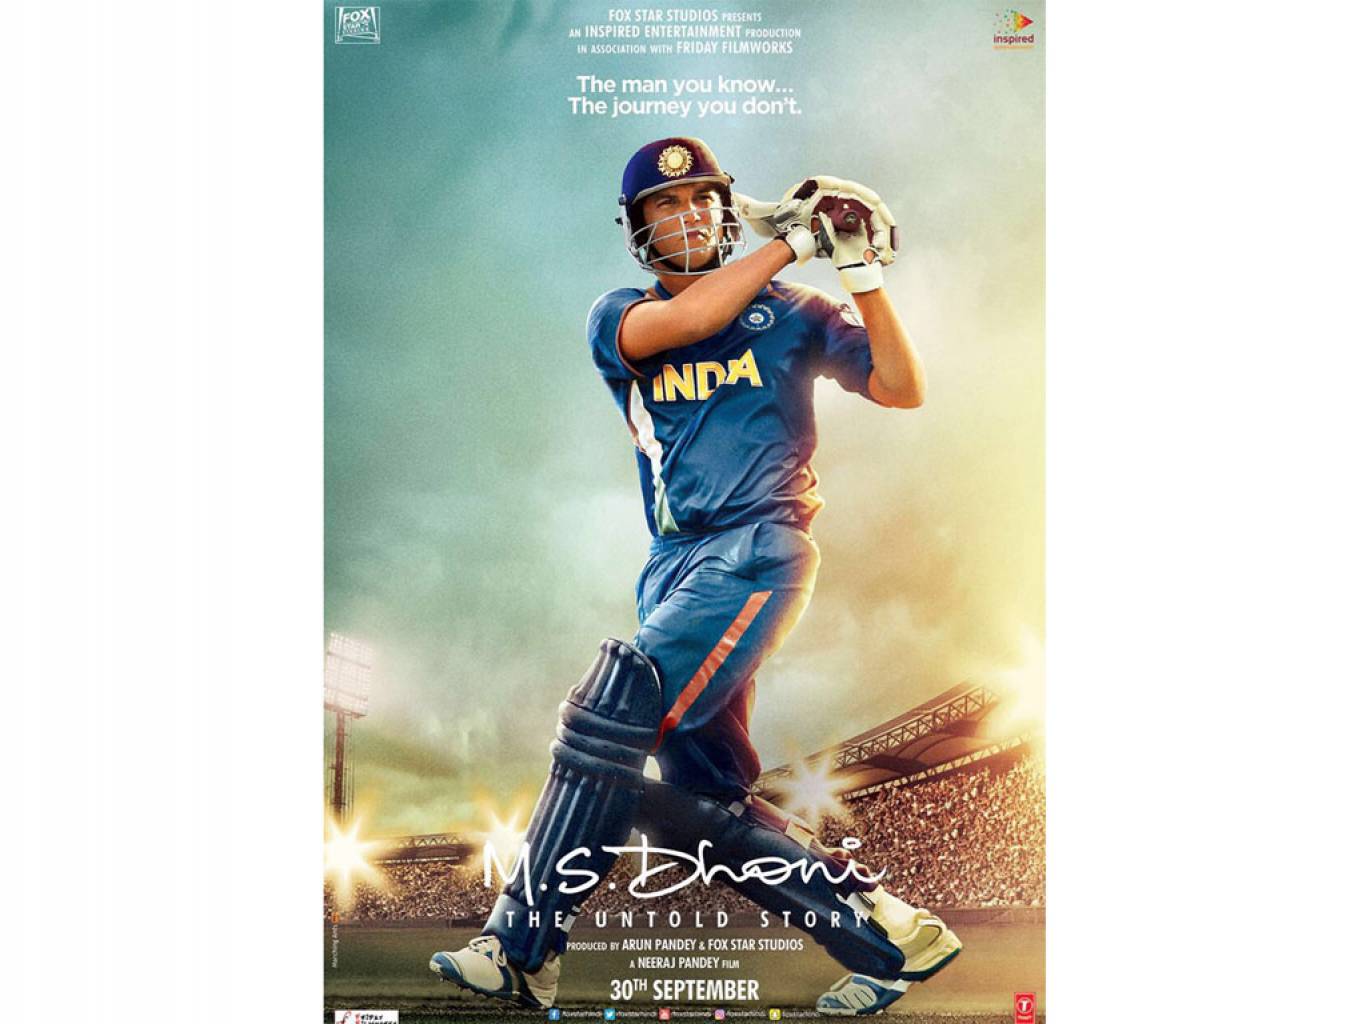 ms dhoni movie hd wallpapers,poster,team sport,player,football autographed paraphernalia,baseball player